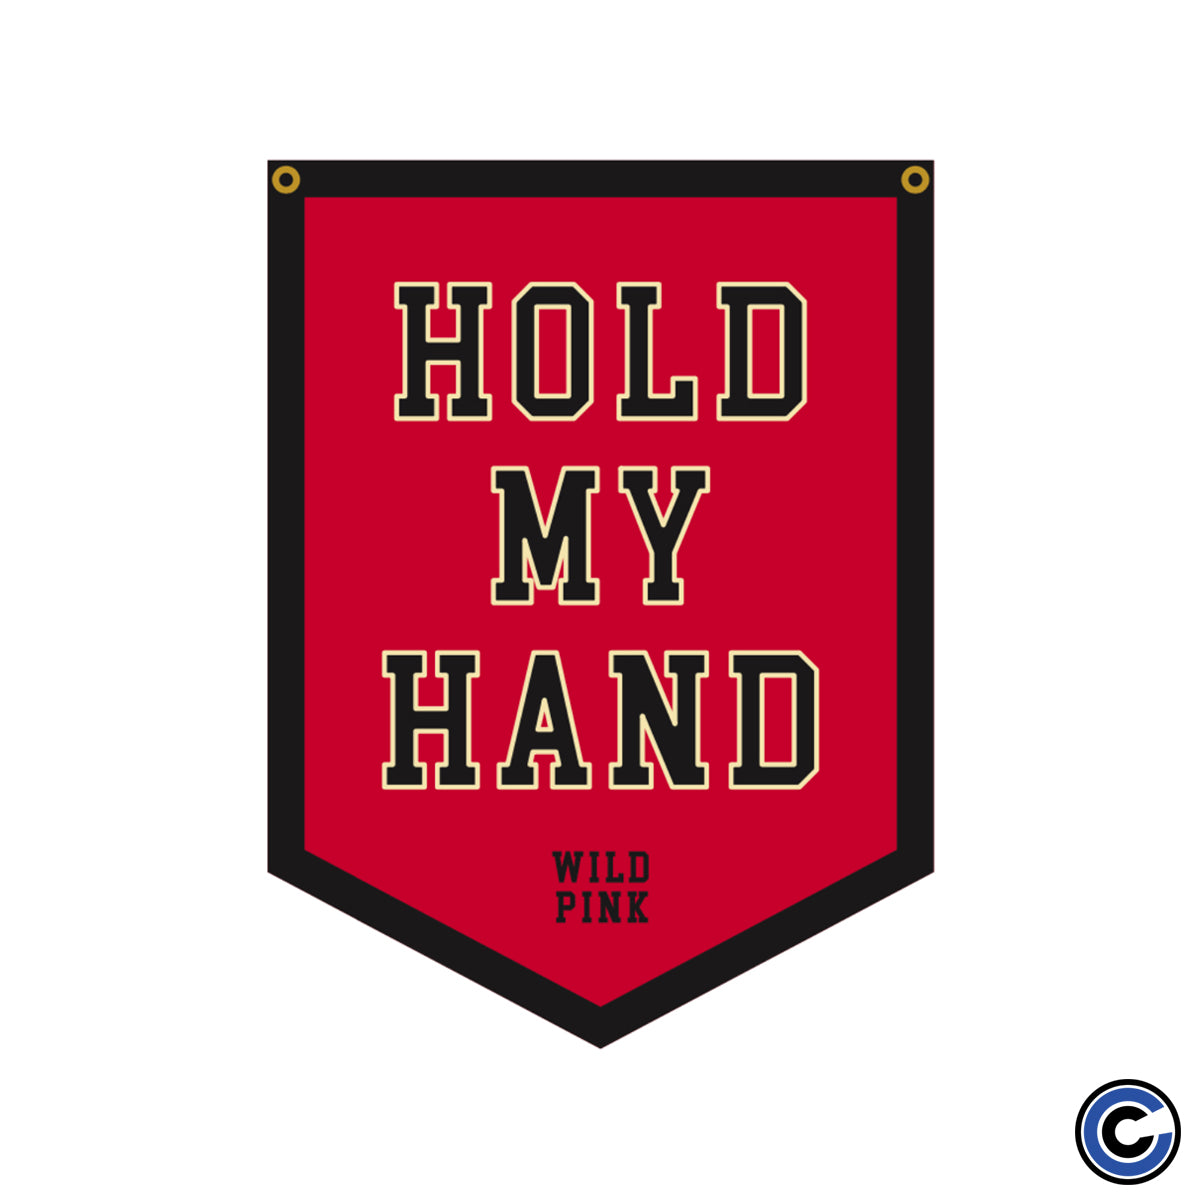 Wild Pink x Oxford Pennant "Hold My Hand" Camp Flag